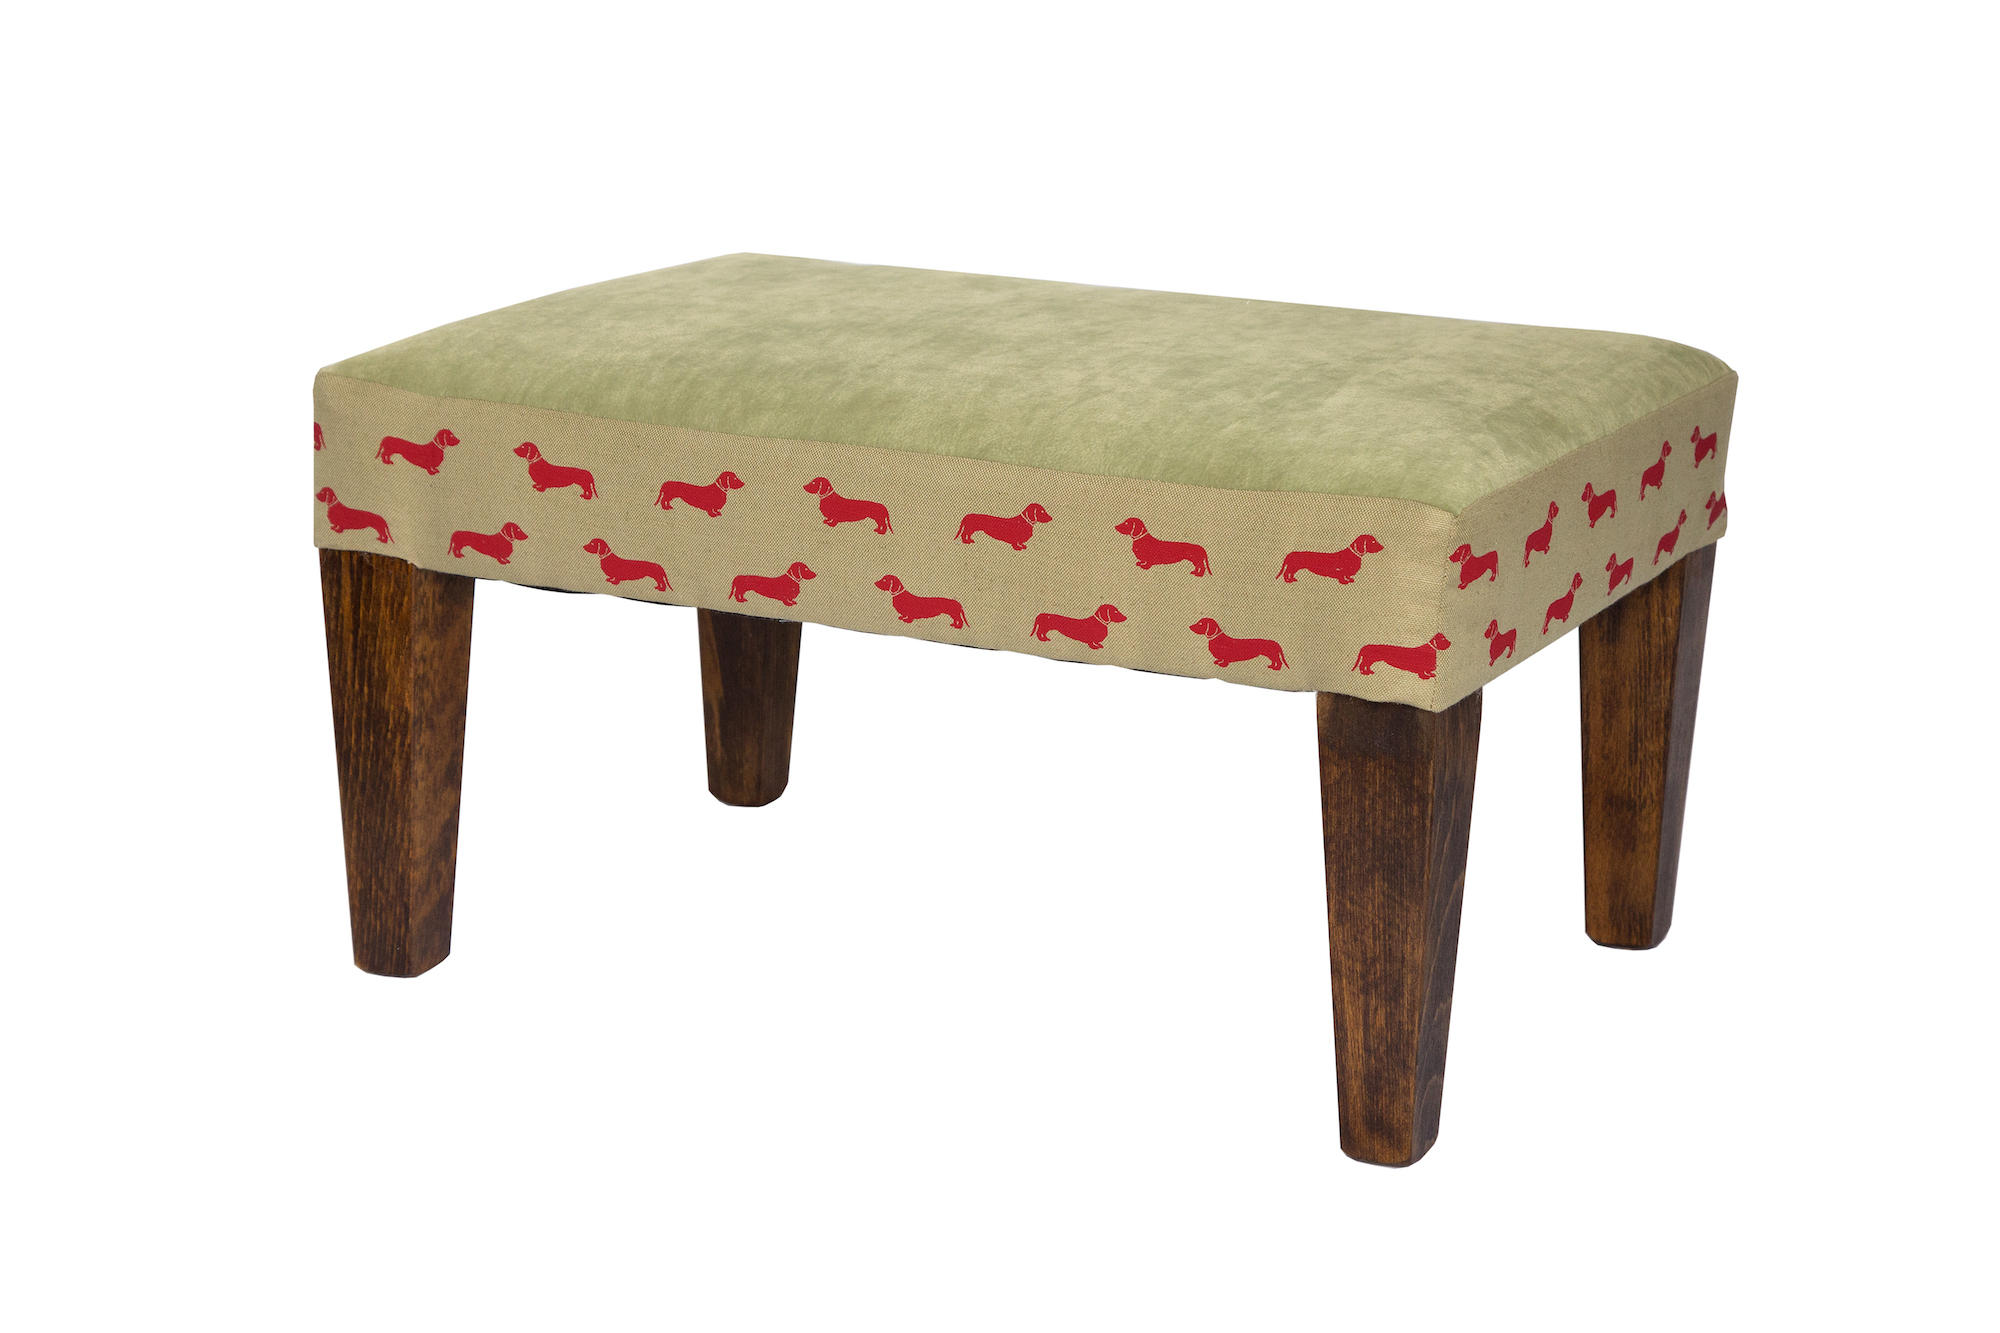 Green with red sausage dog print footstool